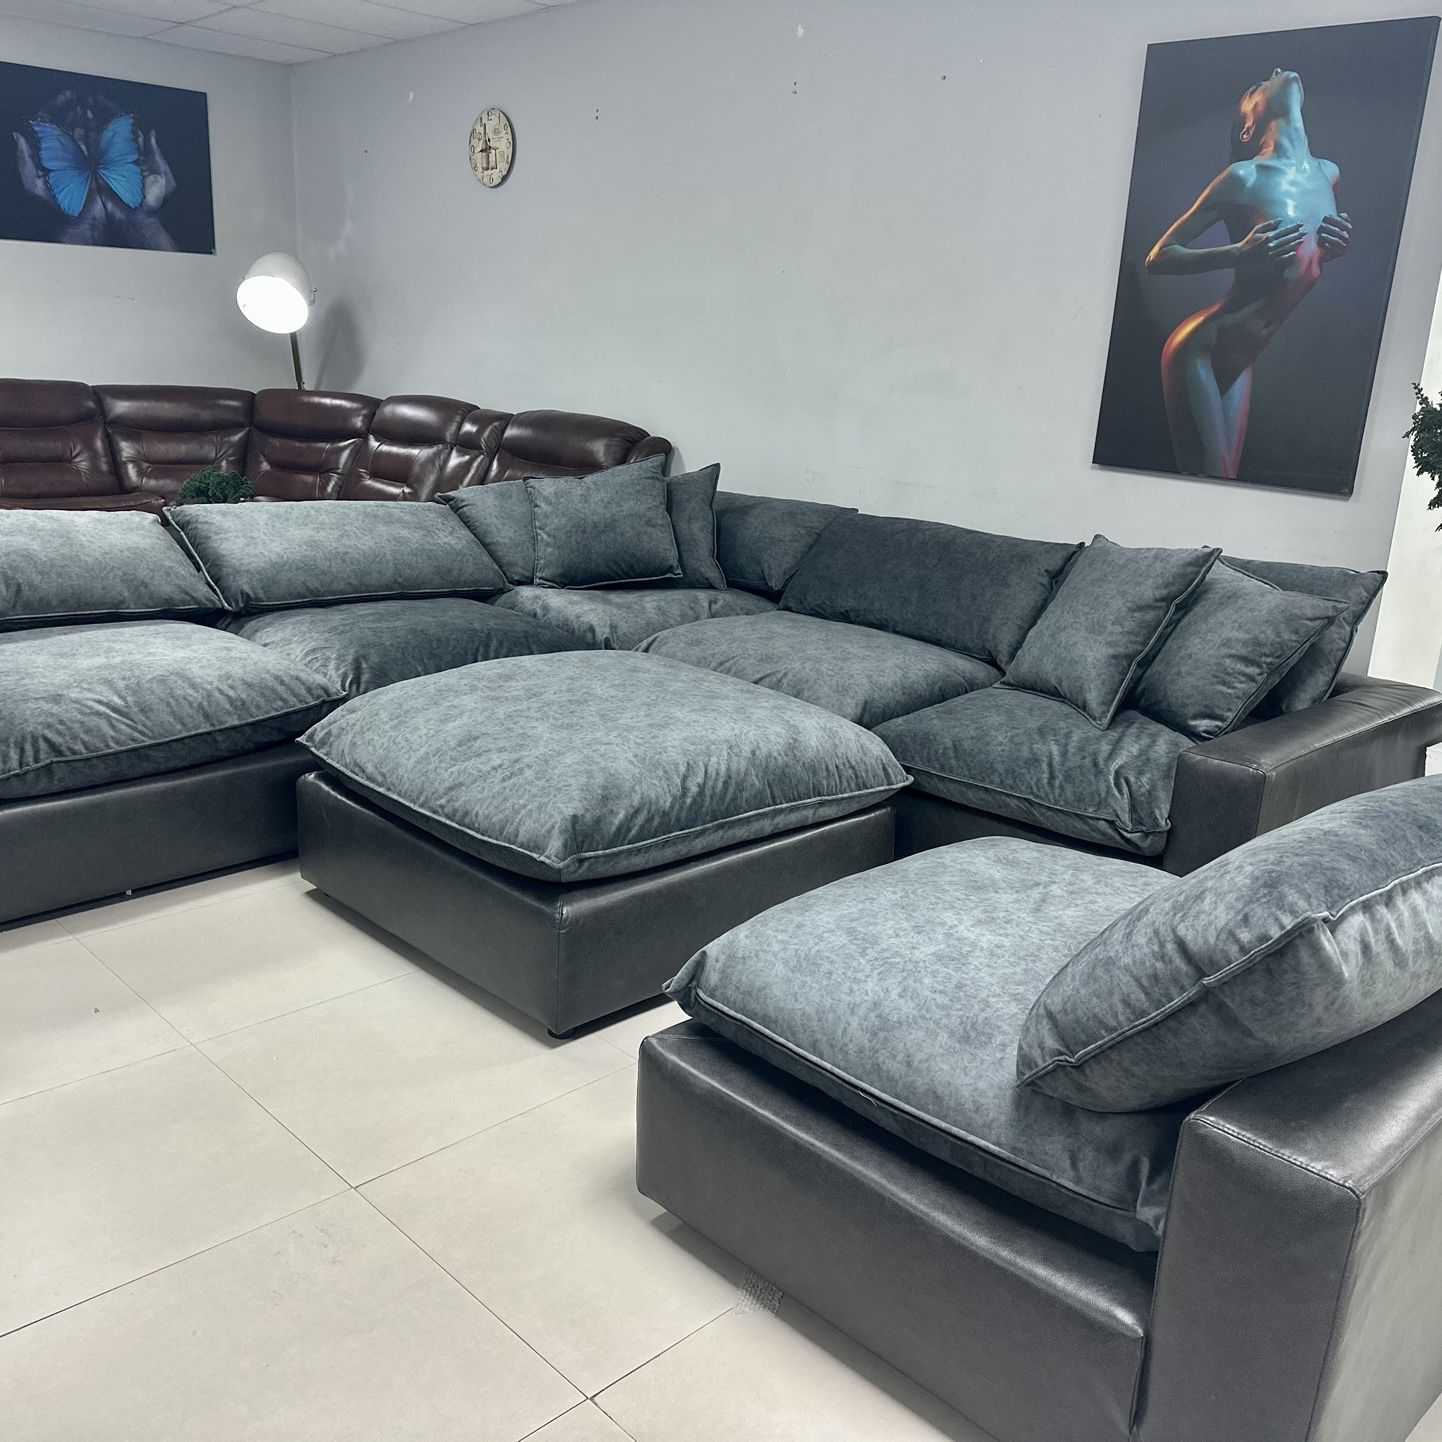 Gorgeous Grey Microfiber + Leather Cloud Sofa Sectional W/ Ottoman + Matching Swivel Chair (Ask For Price)! 